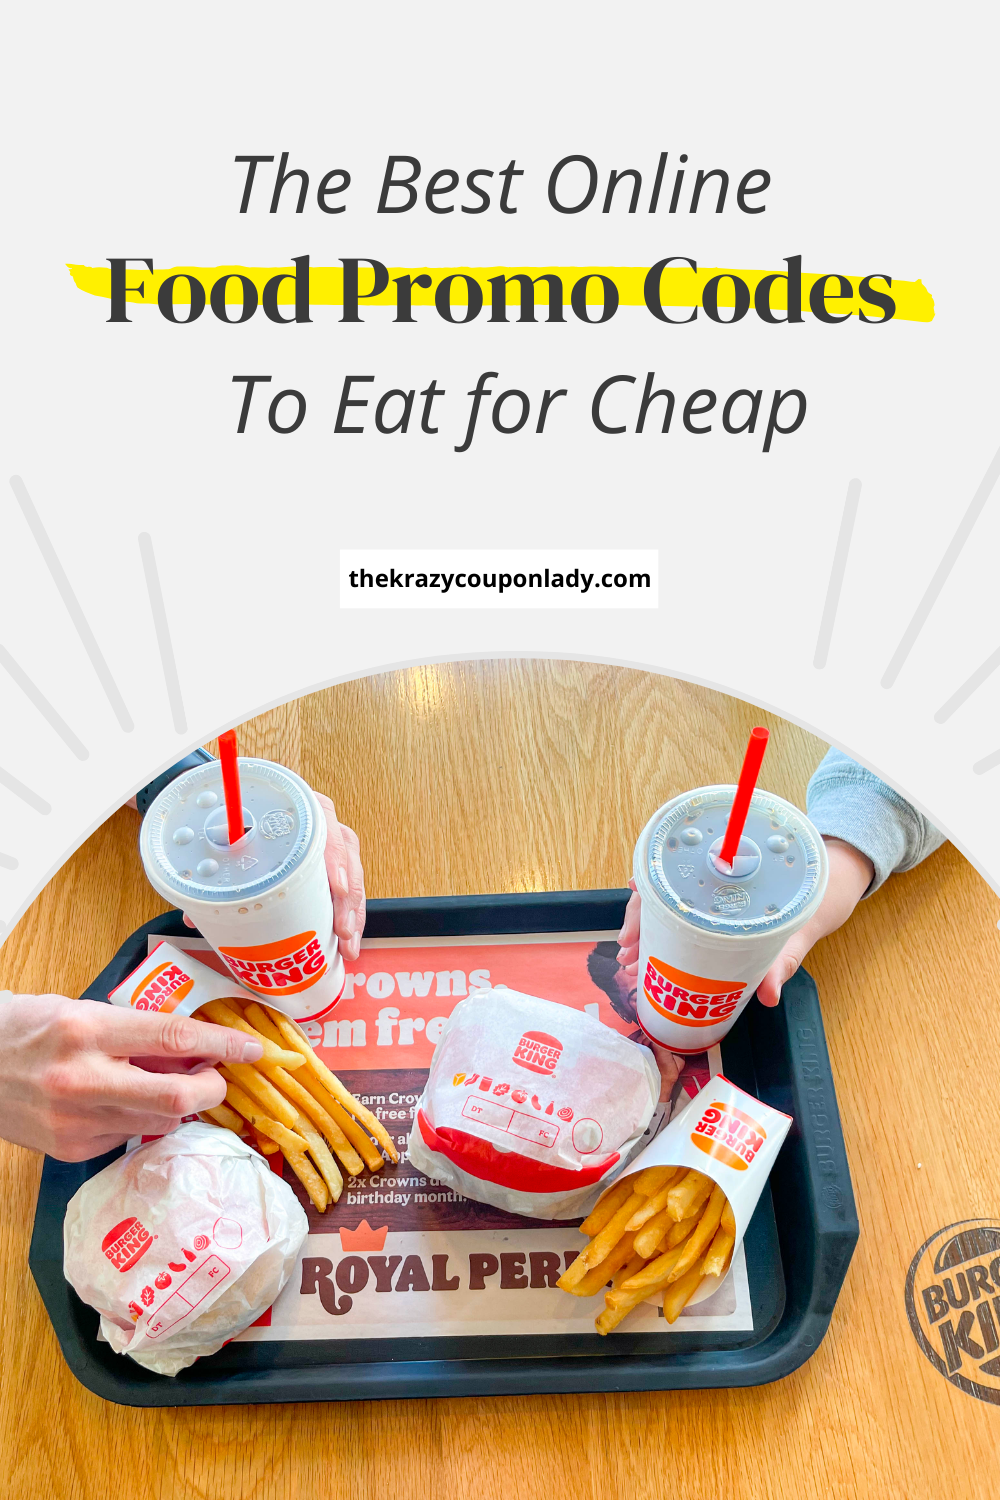 Discount codes for multicultural foods